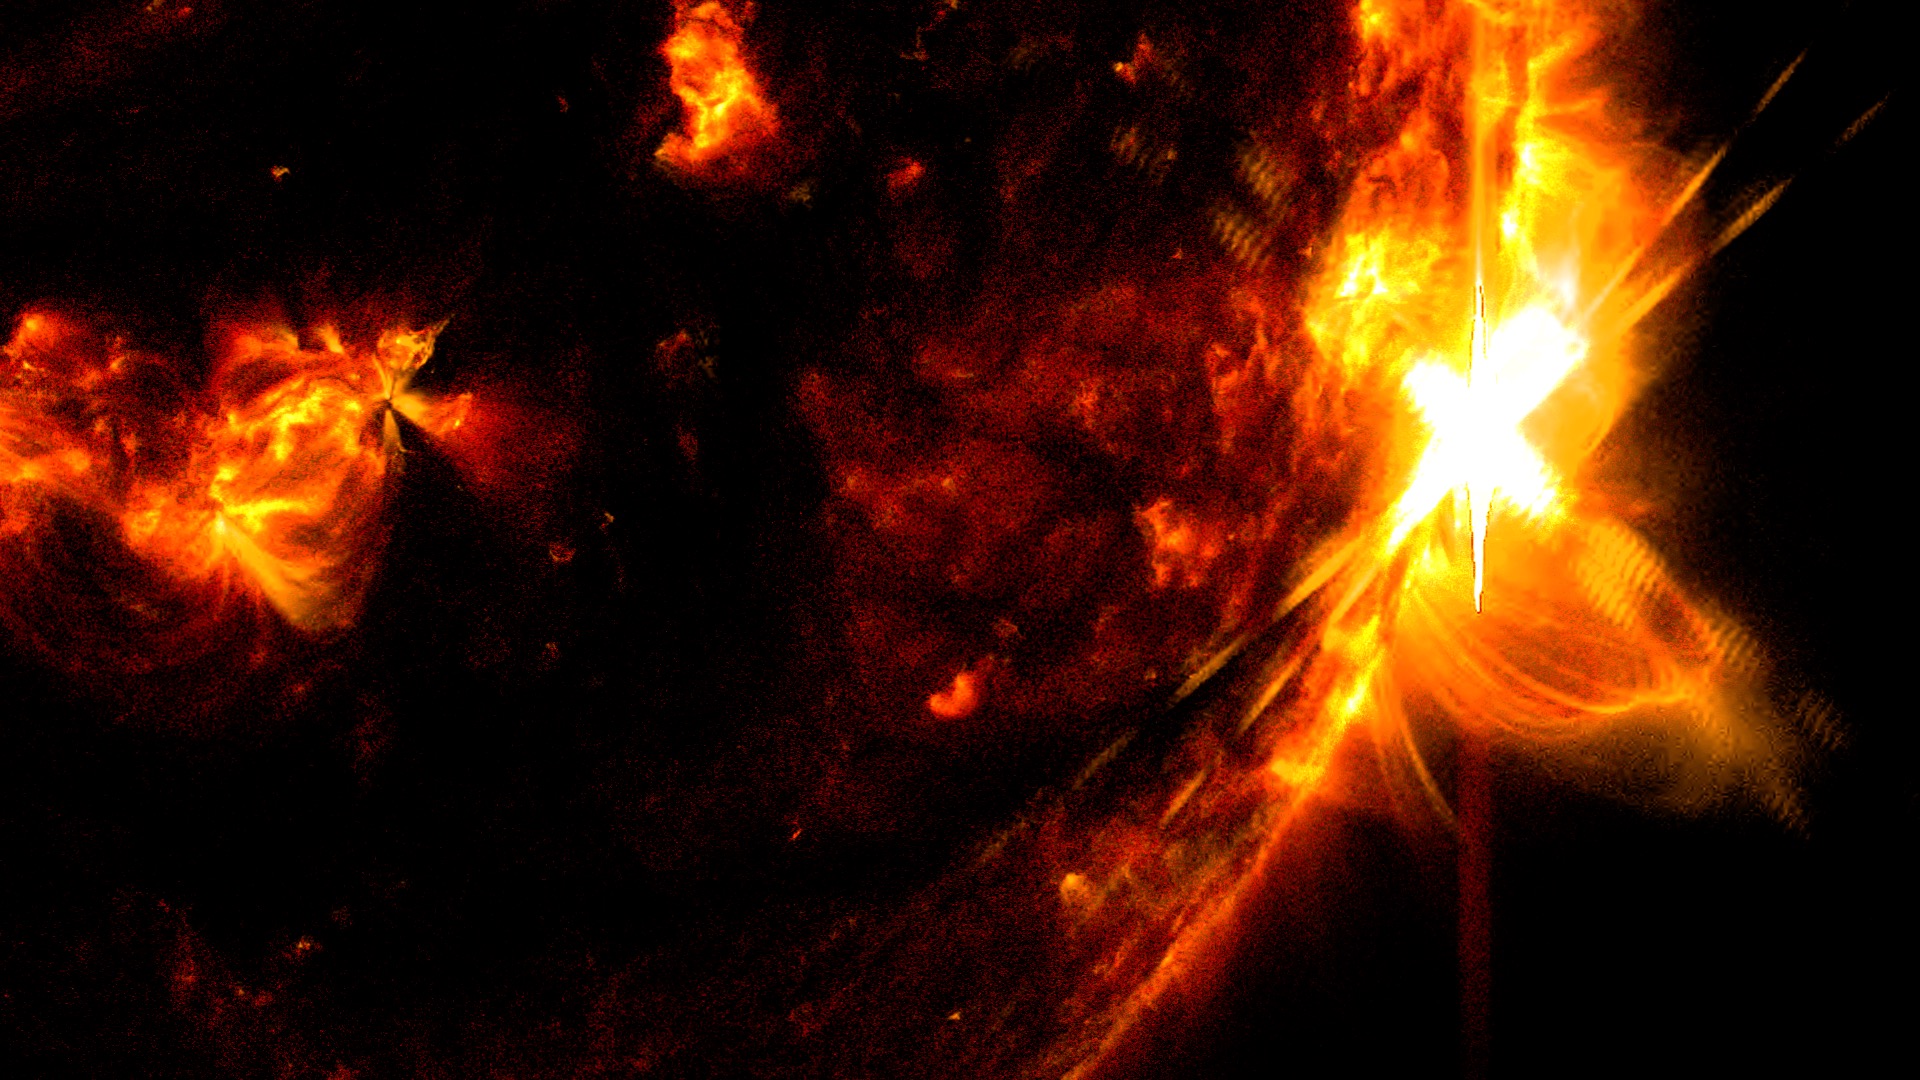 NASA’s Solar Dynamics Observatory captured this image of a solar flare – as seen in the bright flash on the right – on May 14, 2024. The image shows a subset of extreme ultraviolet light that highlights the extremely hot material in flares and which is colorized in red and yellow. Credit: NASA/SDO